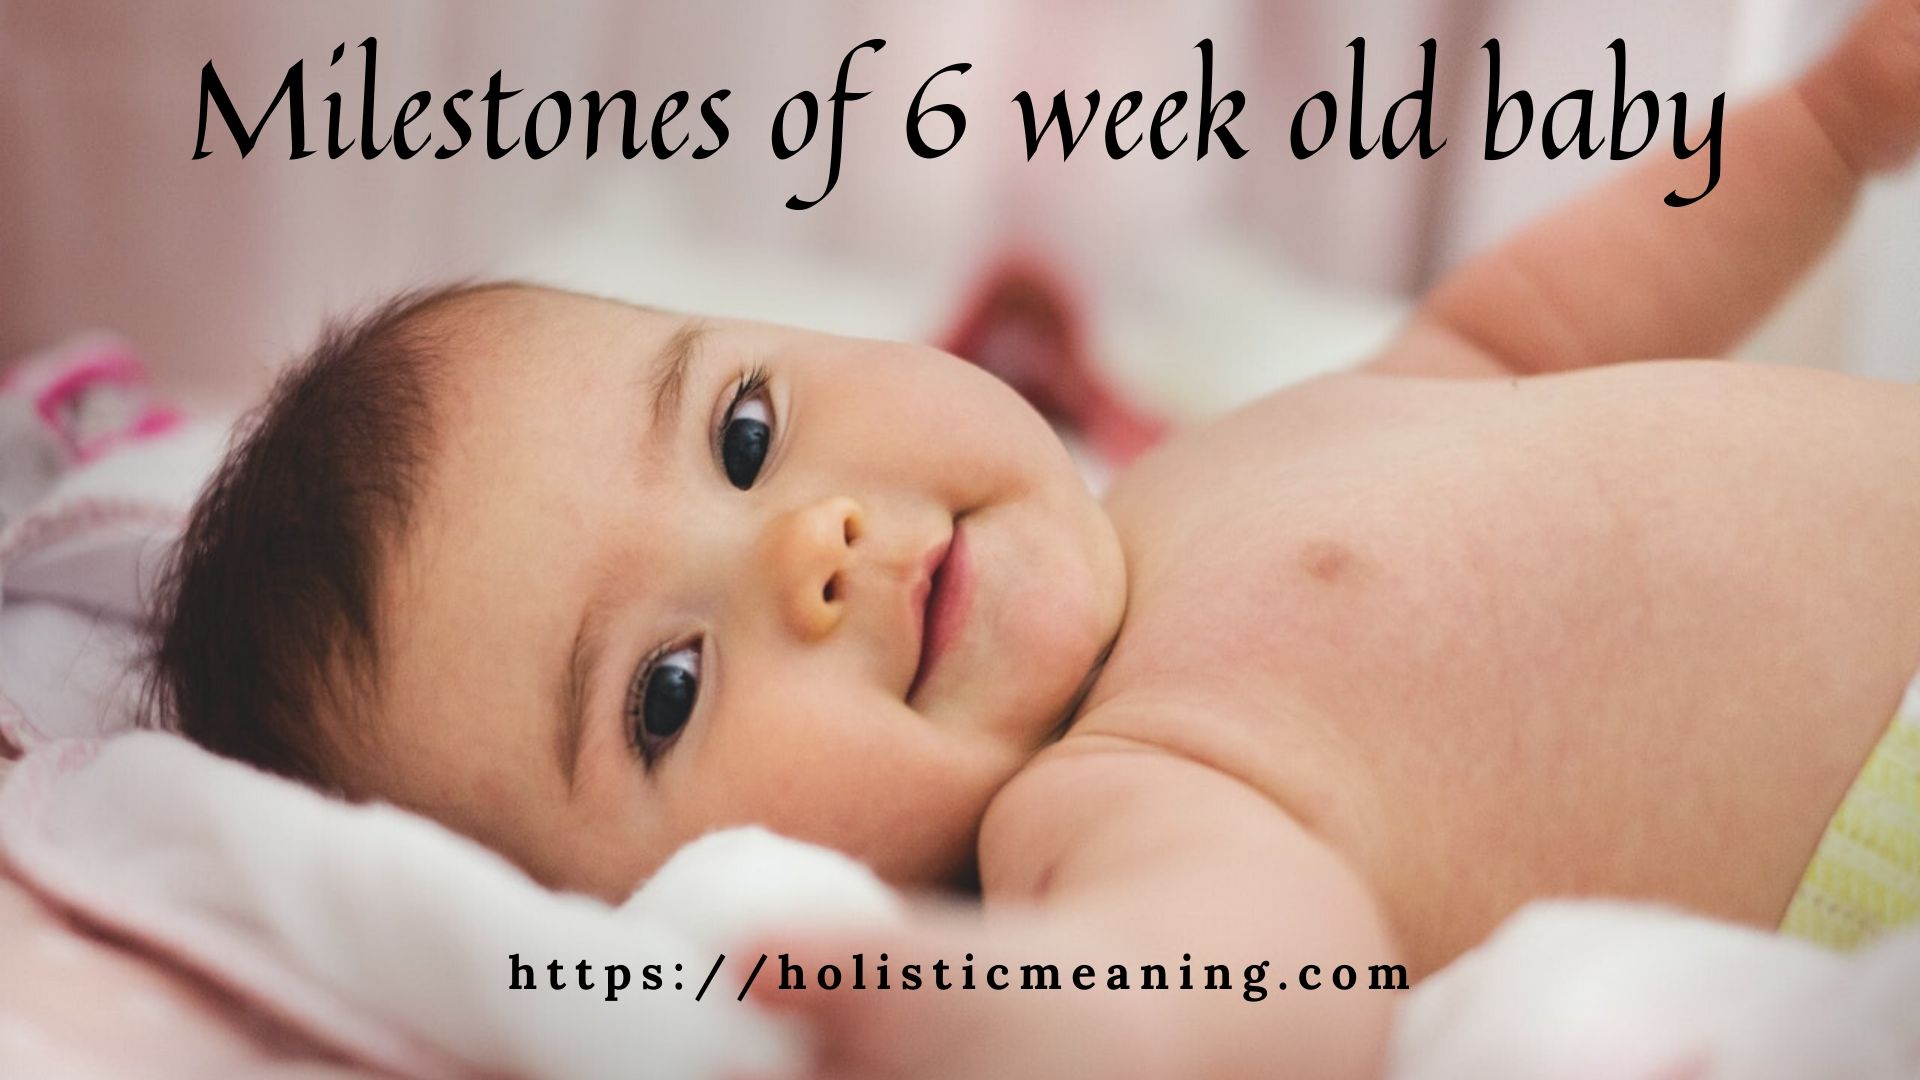 A 6 Week Old Baby’s Development: What You Need to Know